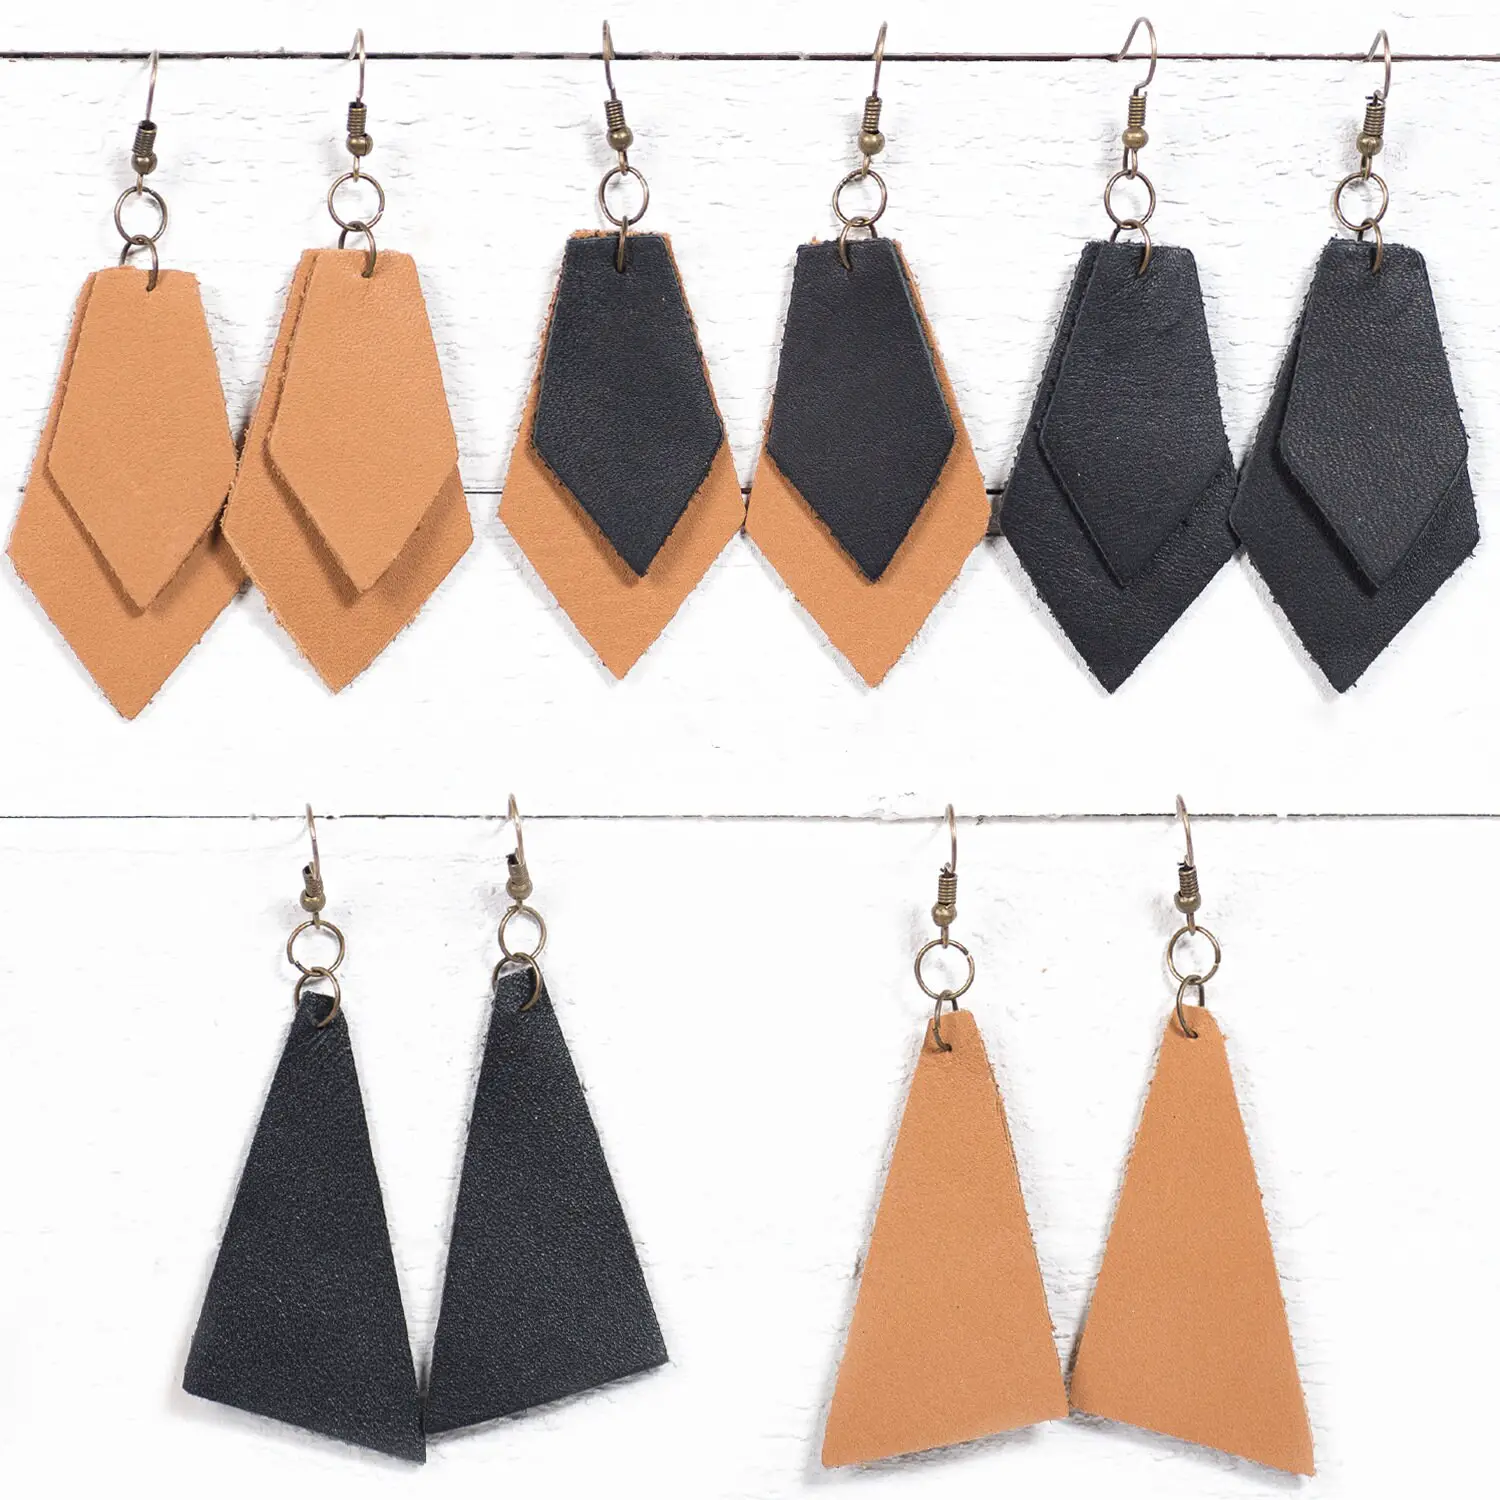 What else should I consider when buying leather earrings